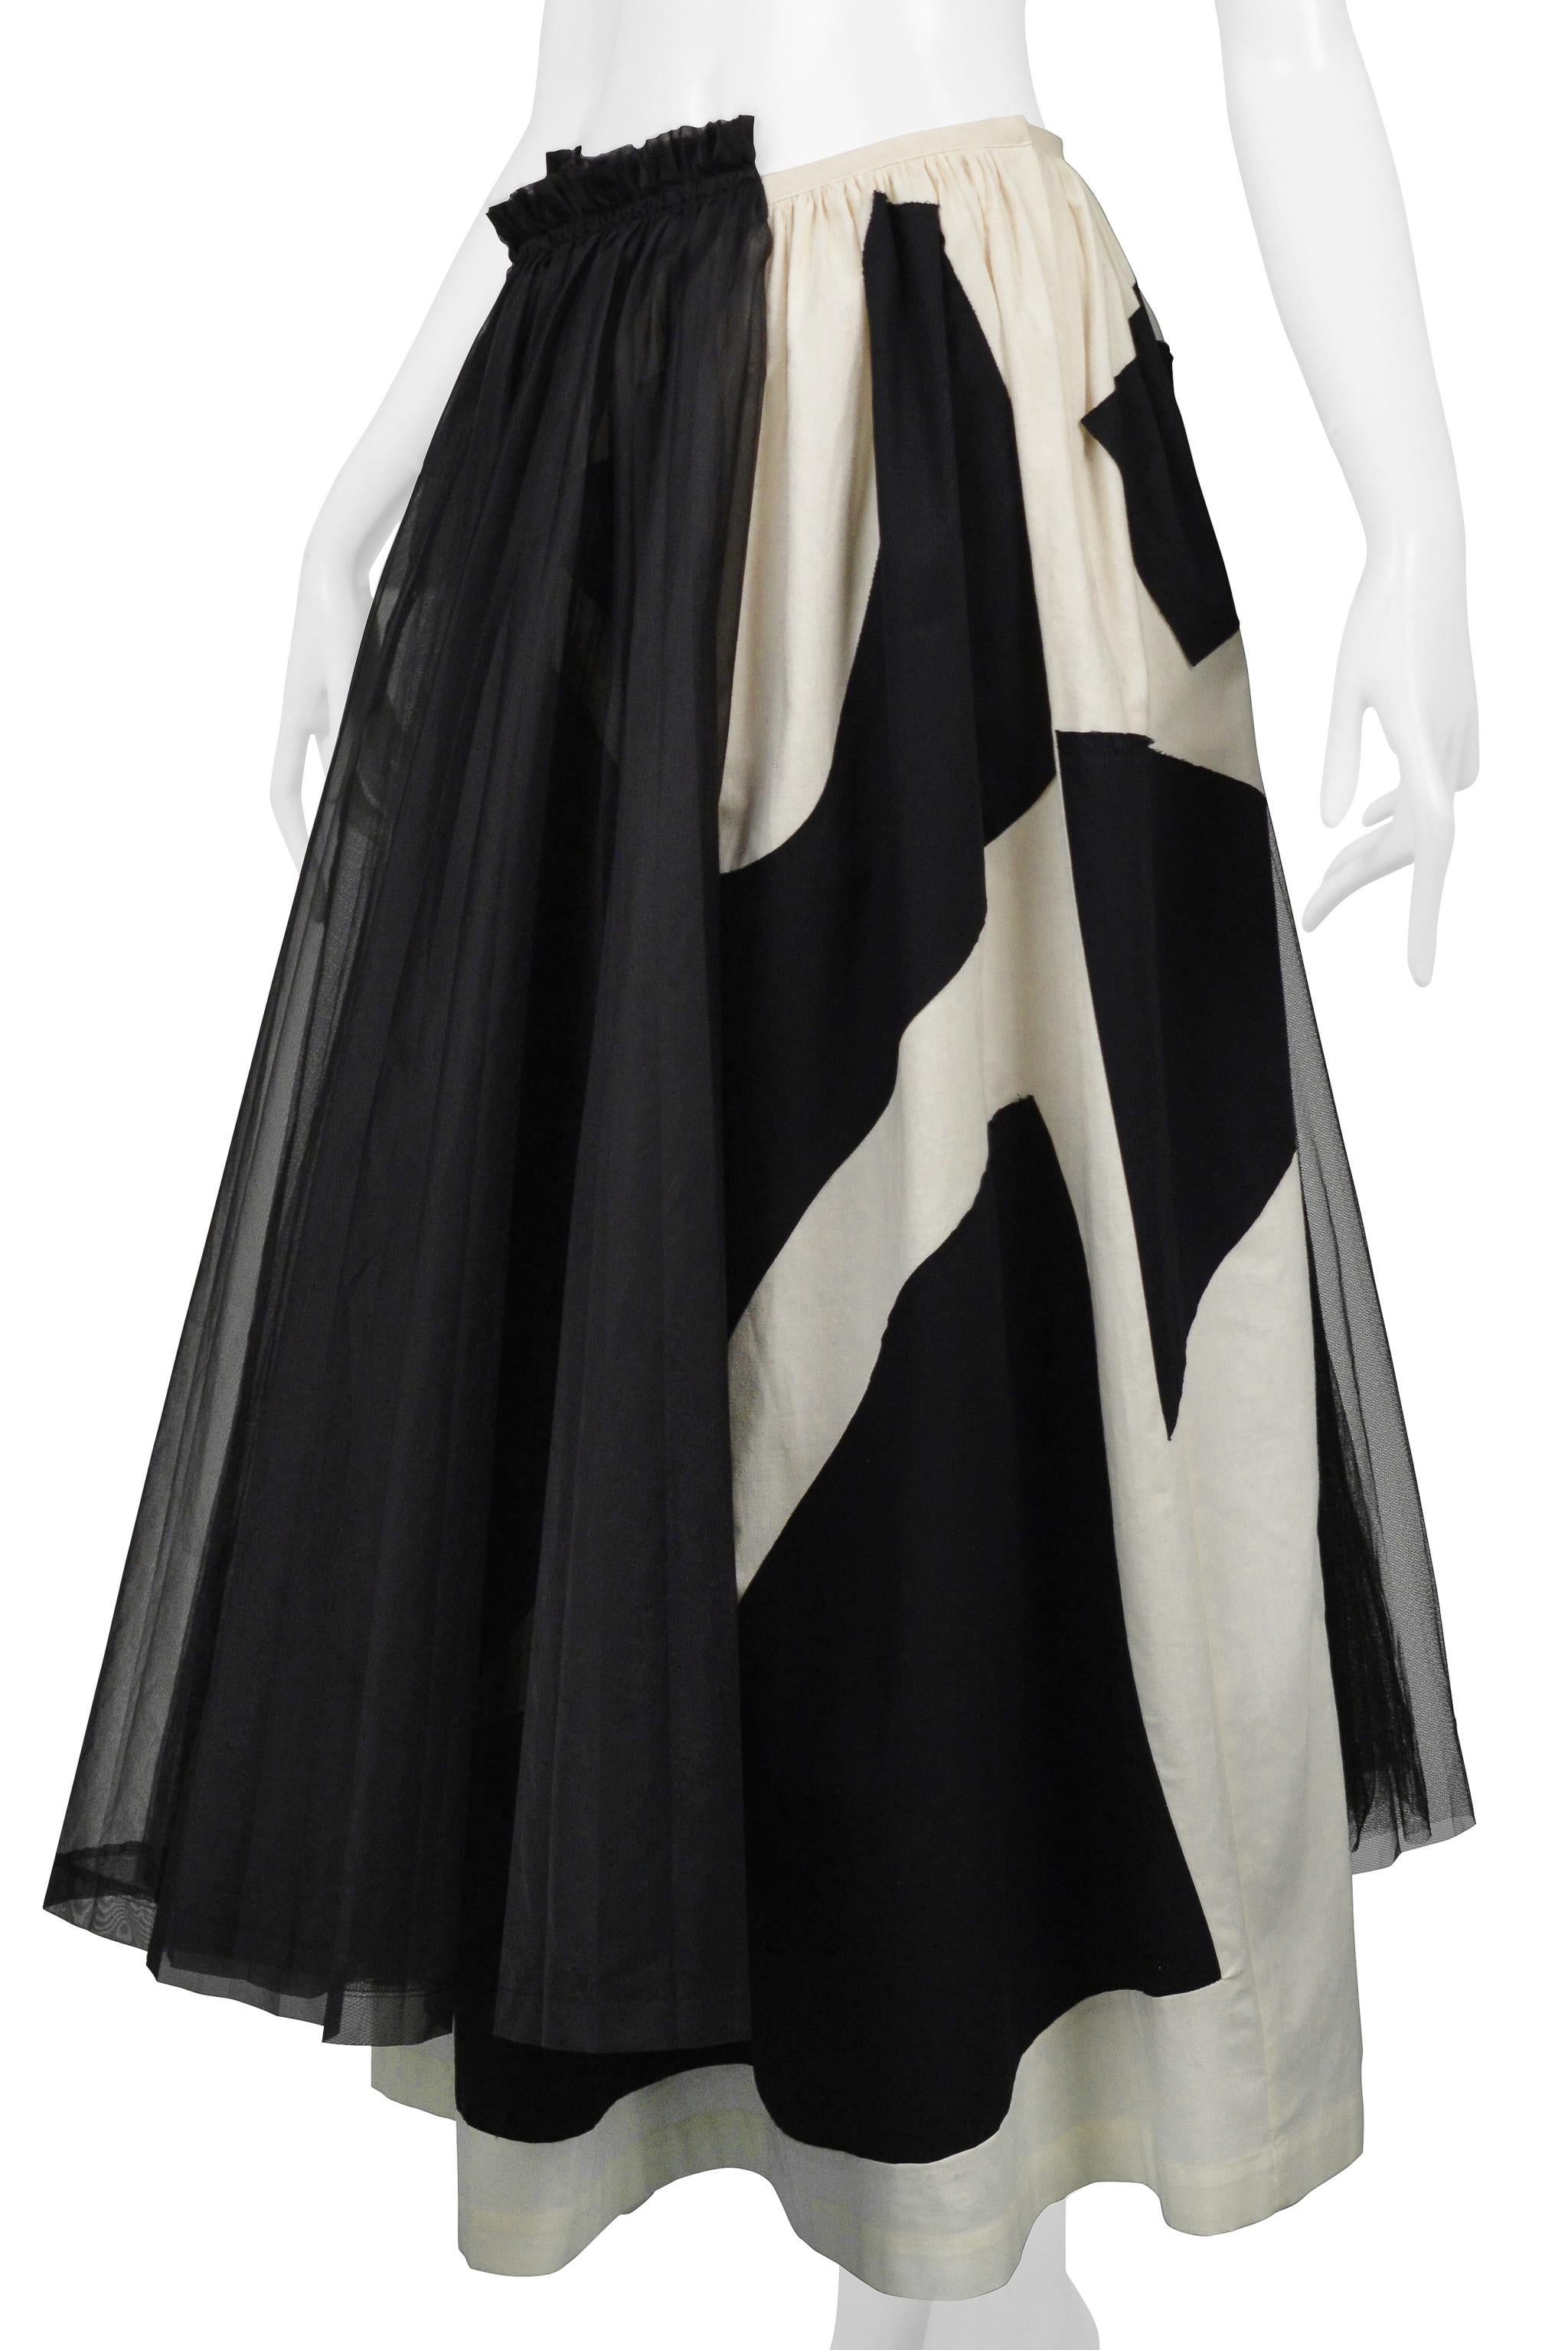 Comme Des Garcons Off-White & Black Abstract Skirt With Black Tulle 2002 For Sale 2